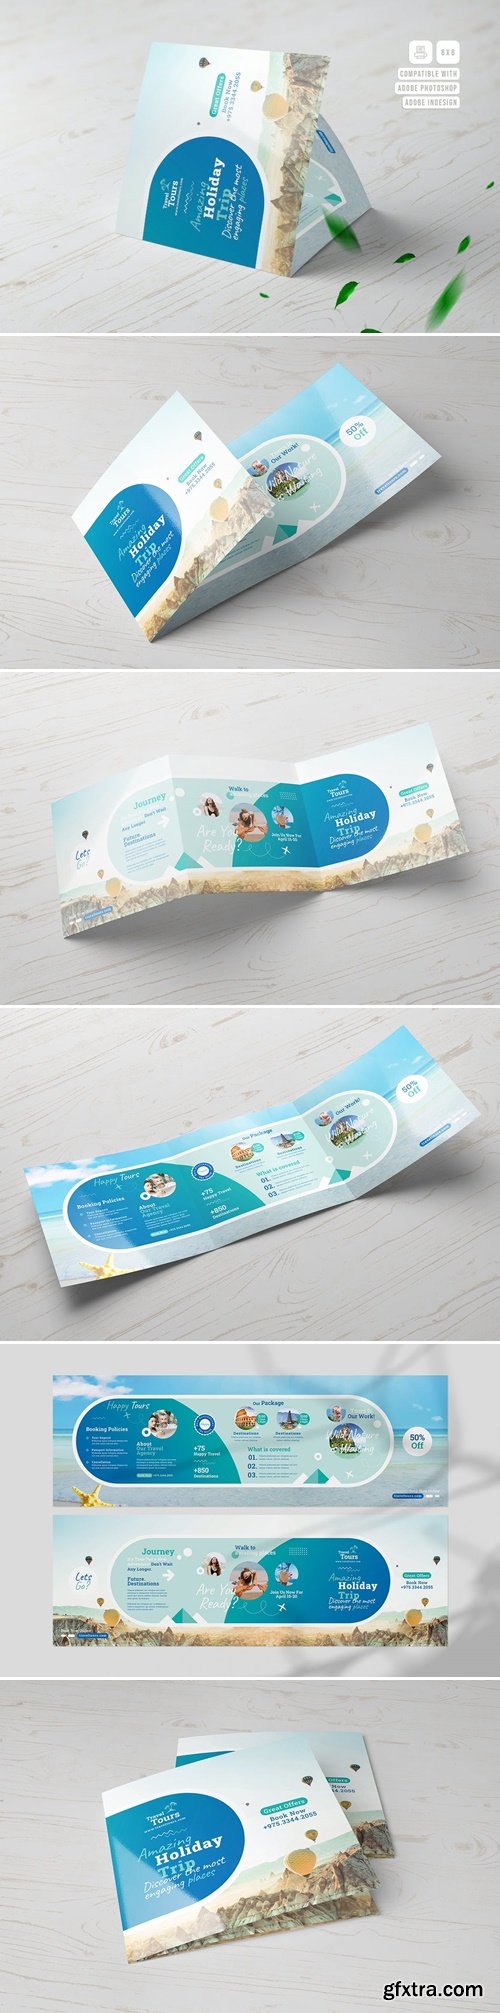 Travel Agency Square Trifold Brochure MULM9NY